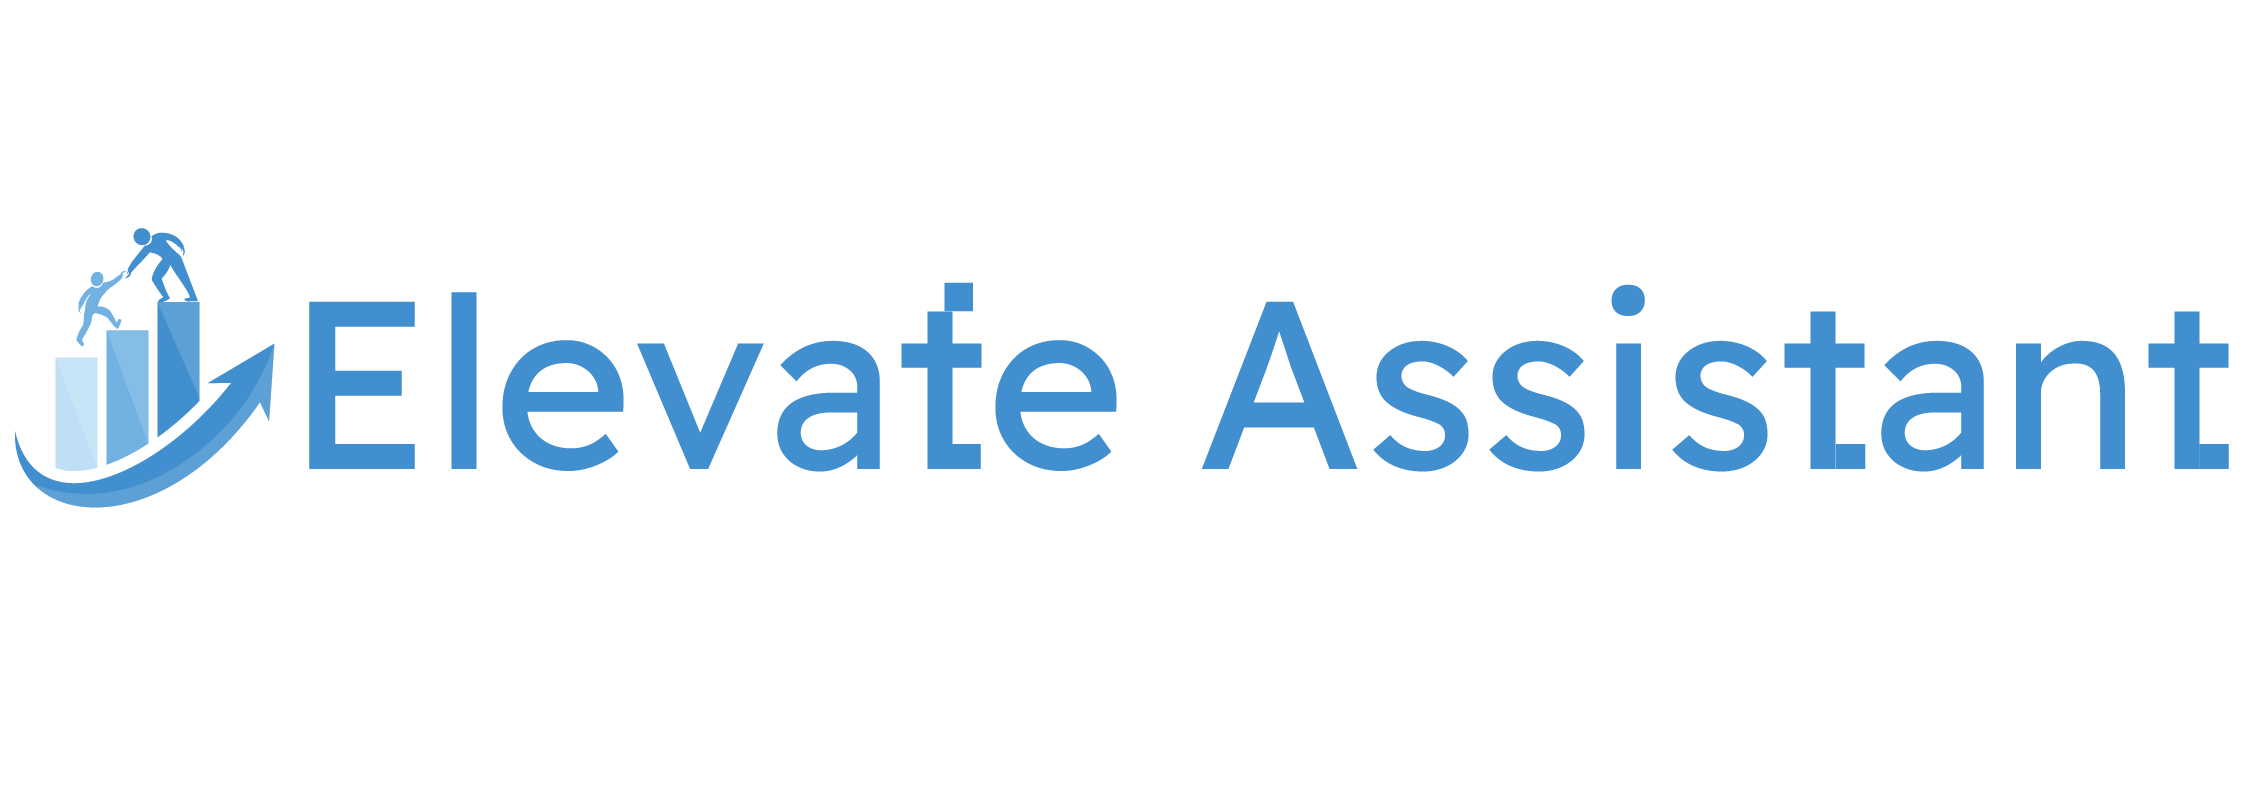 Elevate assistant logo_high_res